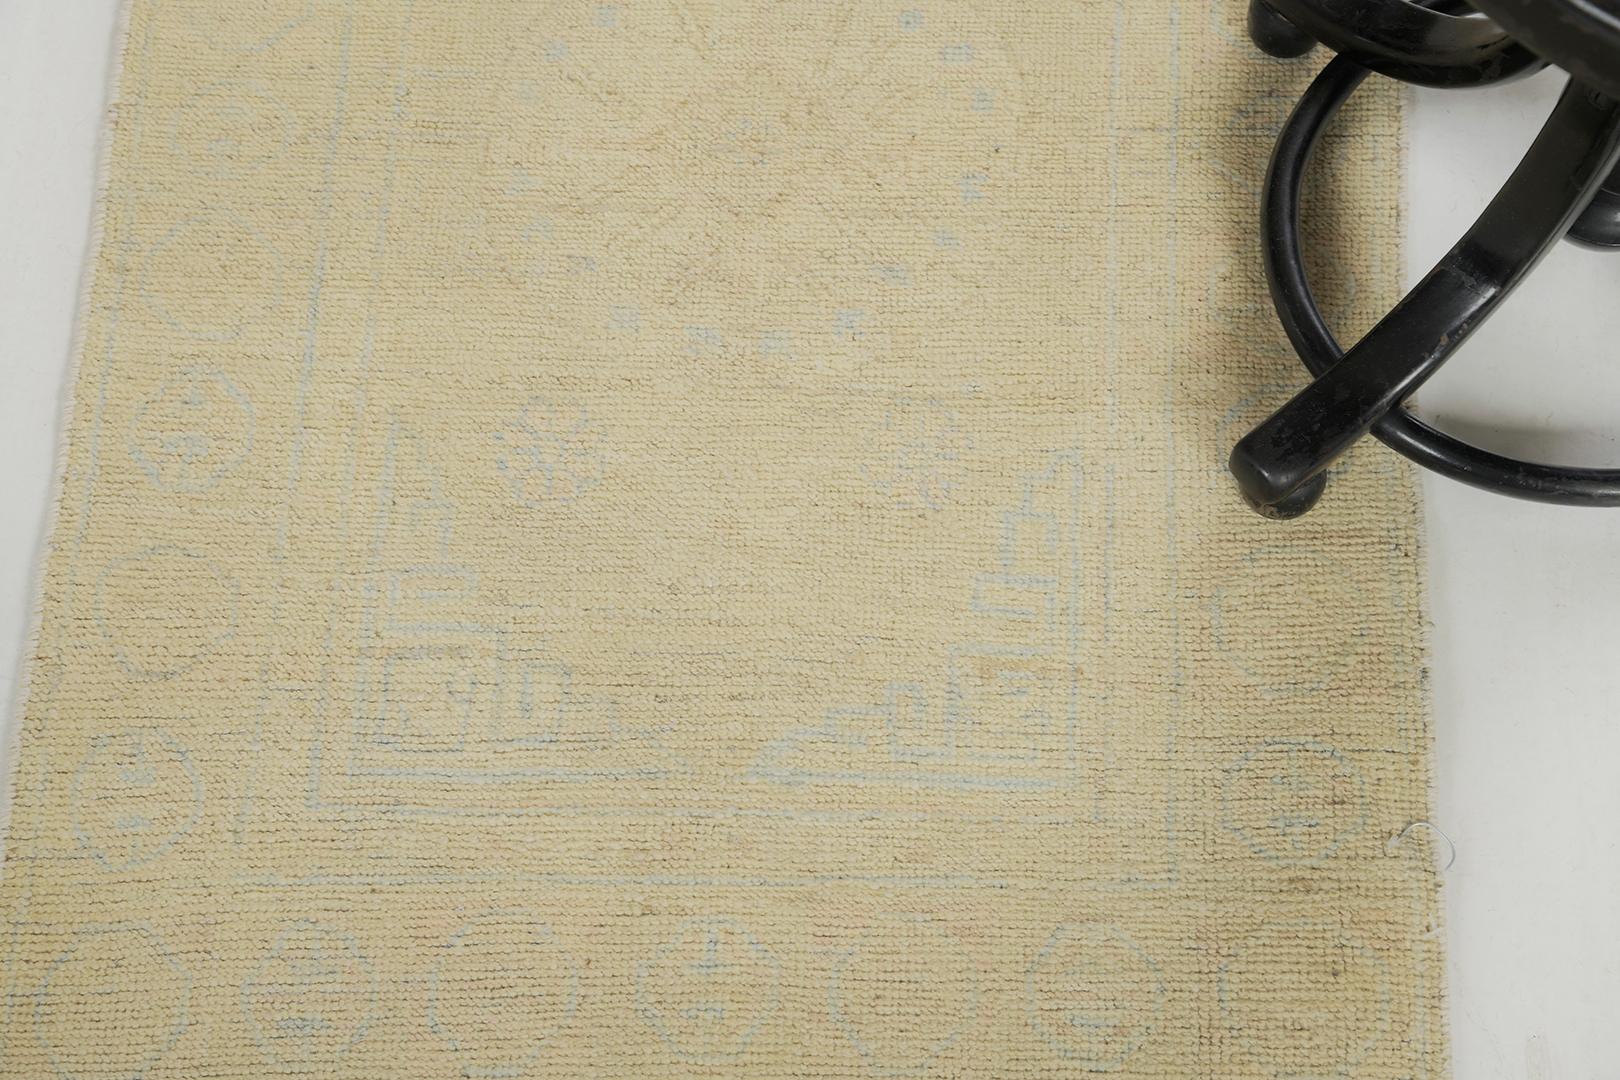 Stylized motifs and elements in camel tones of field and blue outlines express the entire pattern of the rug. This incredible rug is flexible for any home core decor. An amazing hand-spun wool Khotan design revival from our Muted Collection has come